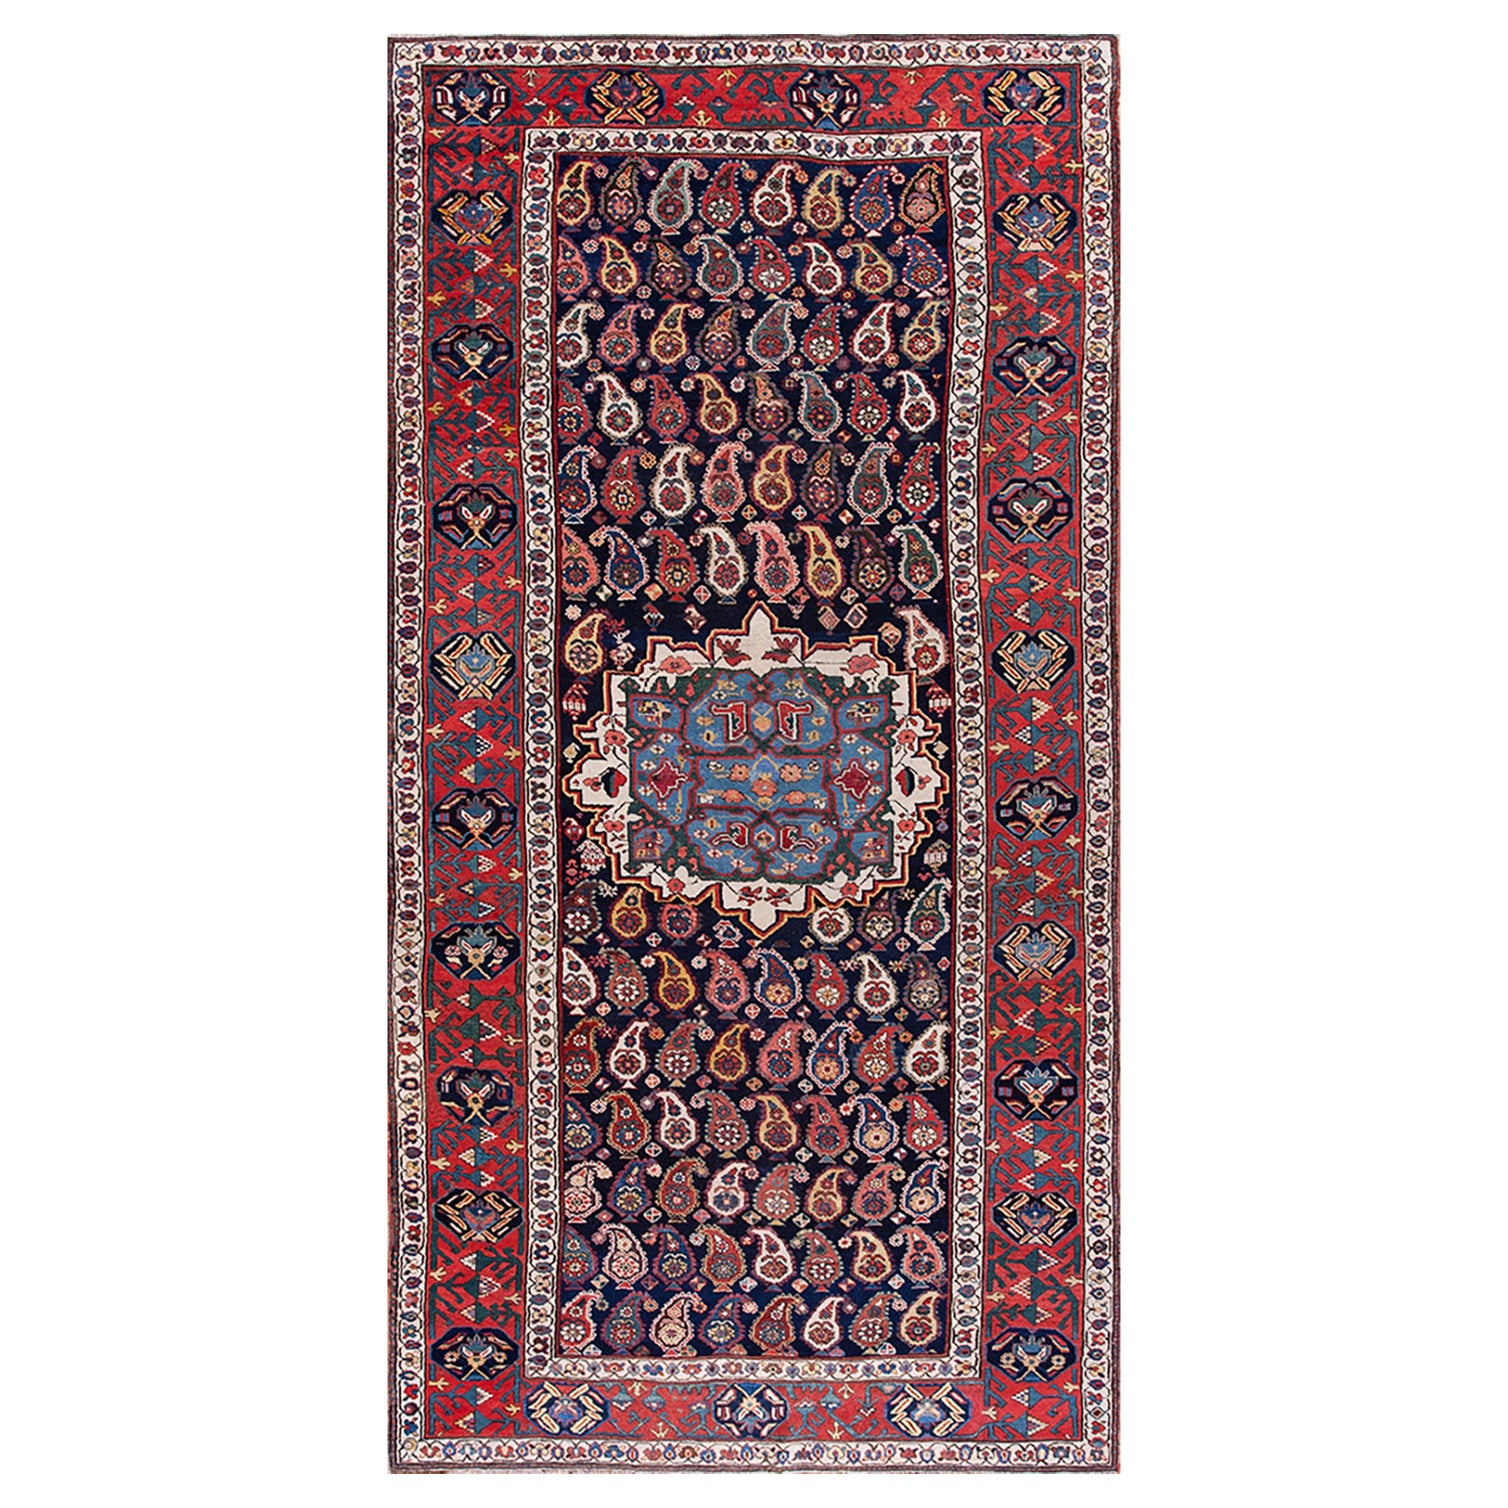 Antique Early 19th Century Caucasian Karabagh Carpet For Sale